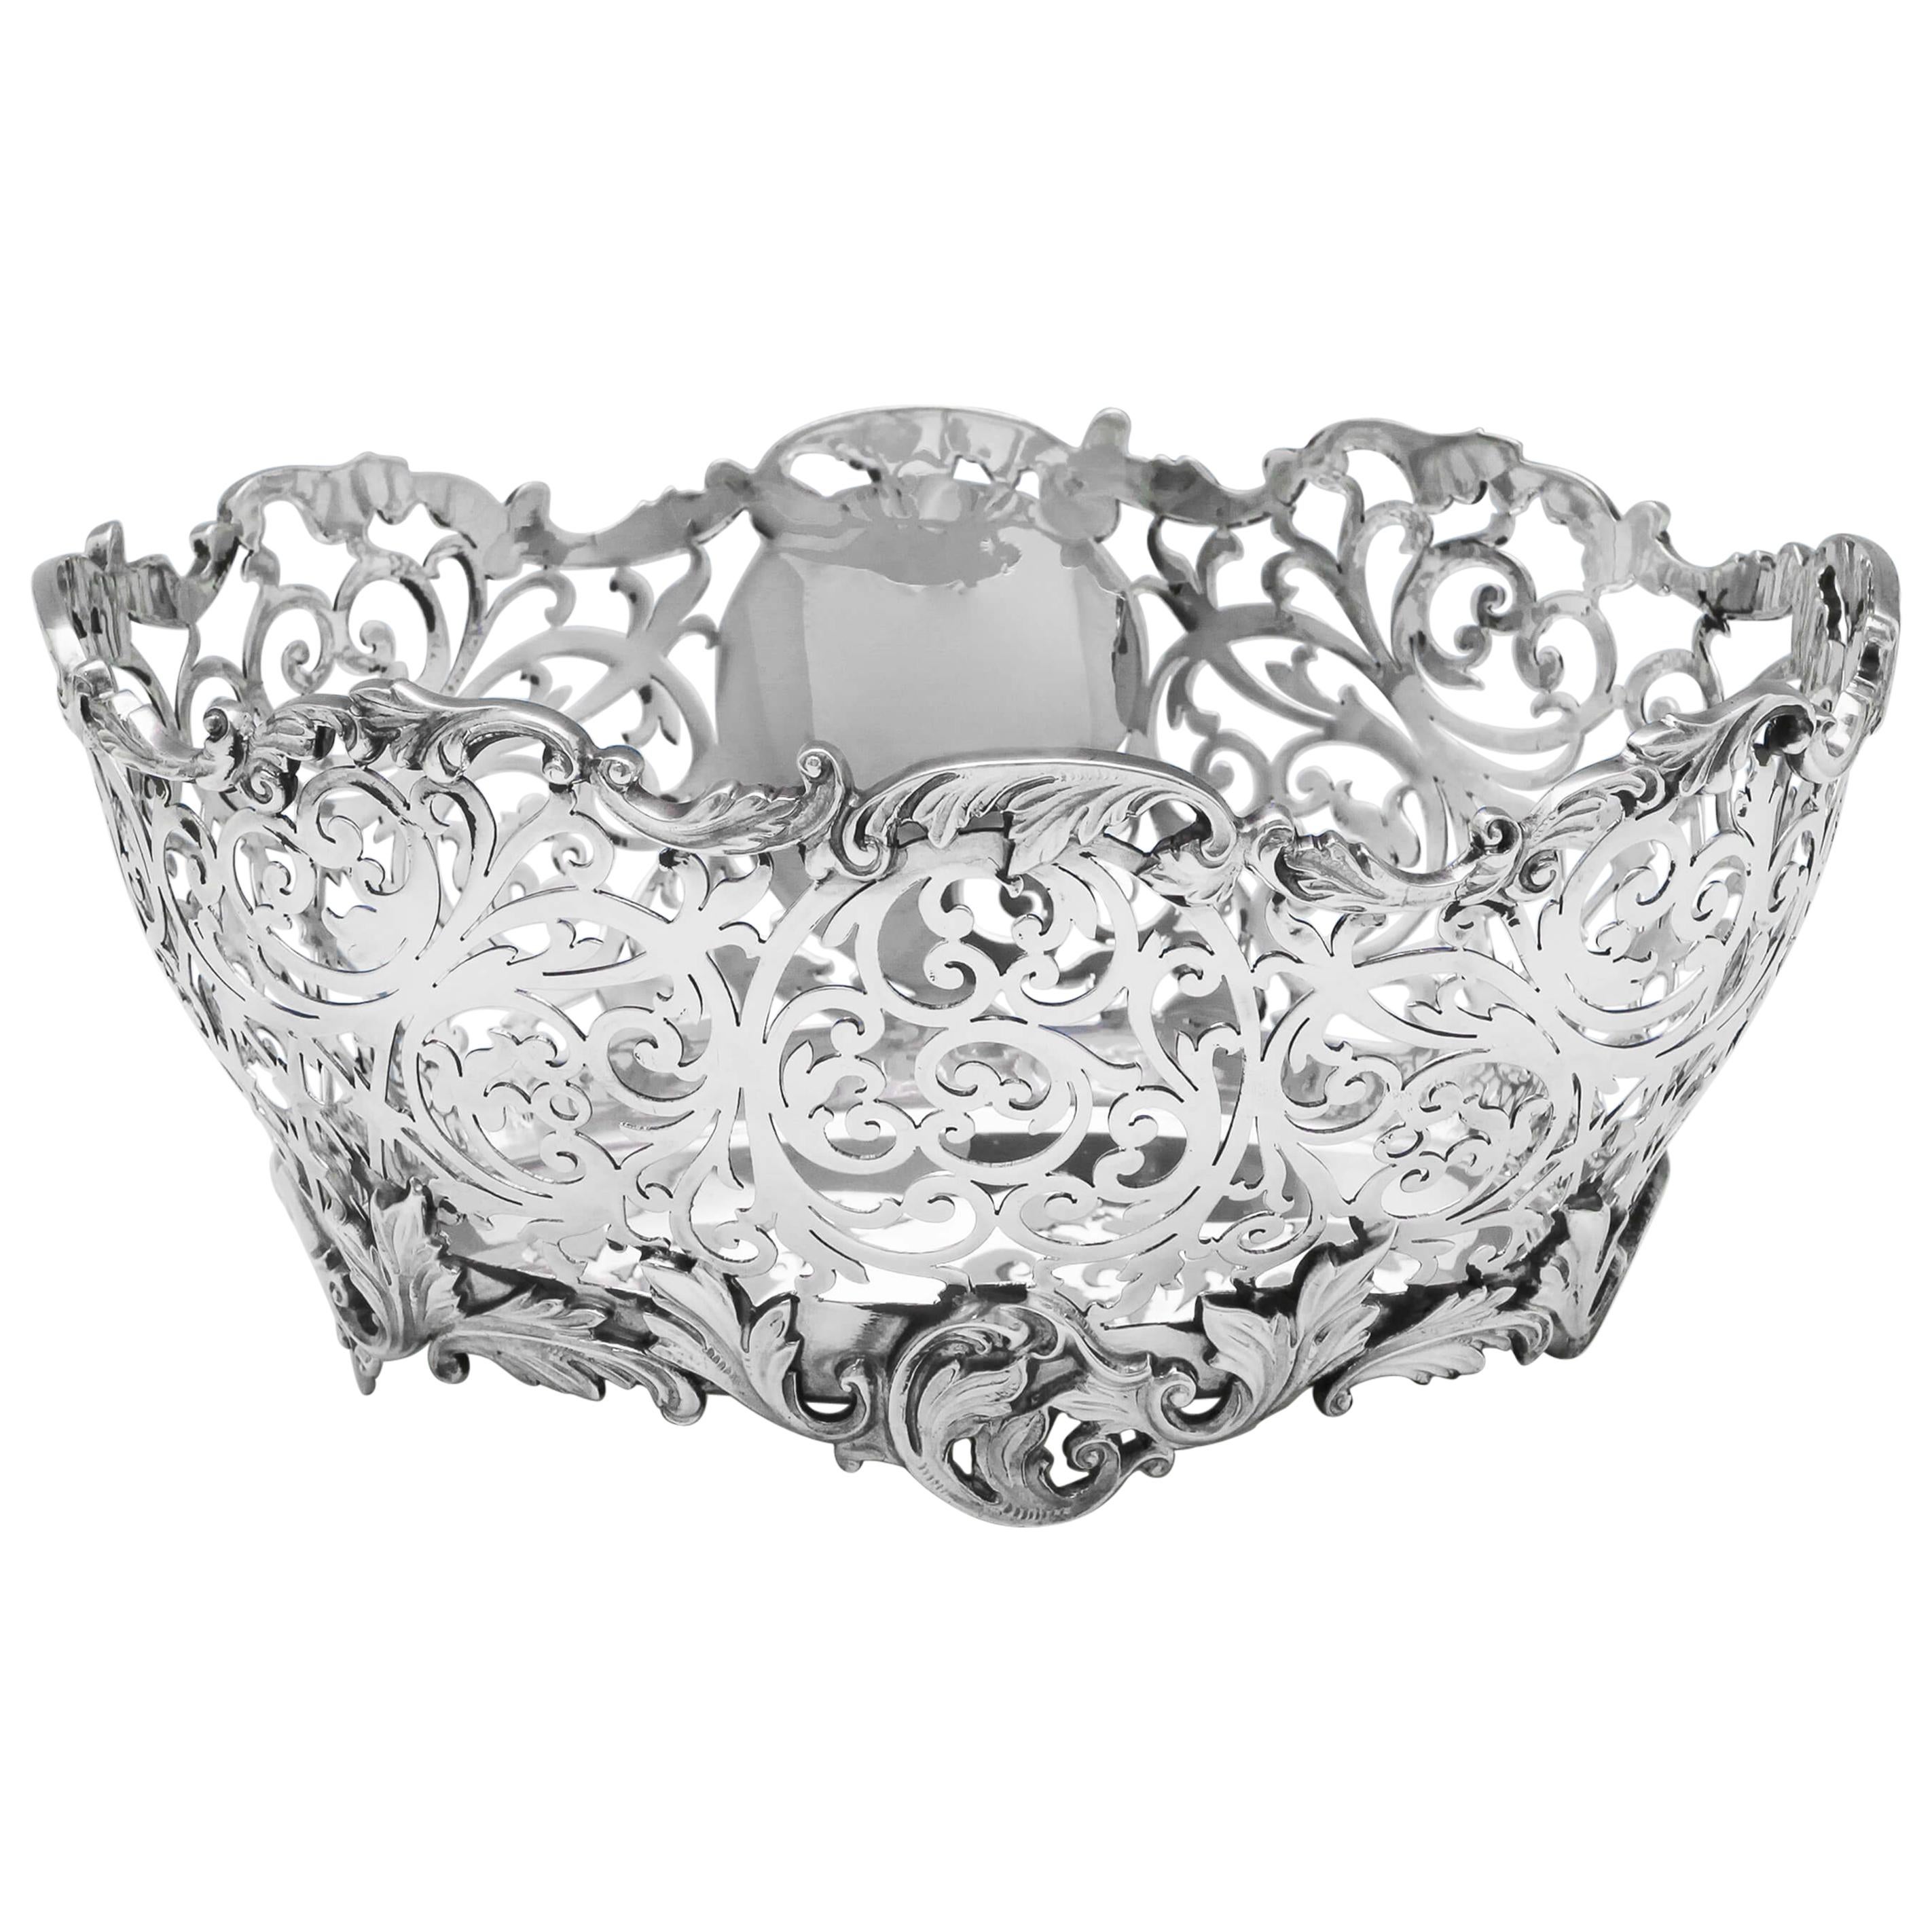 20th Century Sterling Silver Pierced Dish Made in 1923